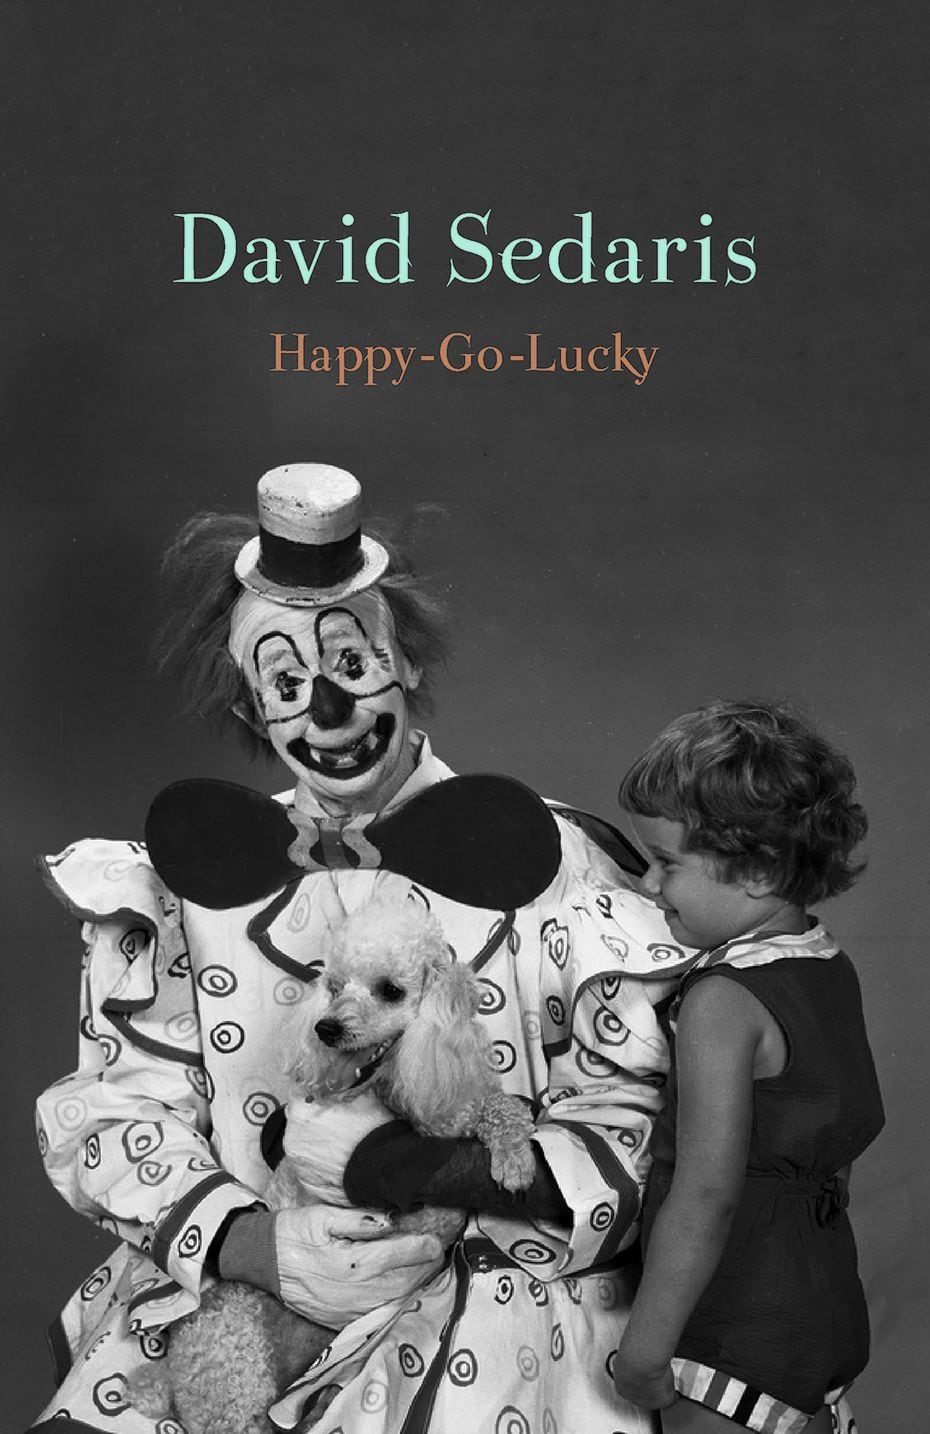 From the cover of "Happy-Go-Lucky" to the end, David Sedaris finds the humor in the COVID-19...